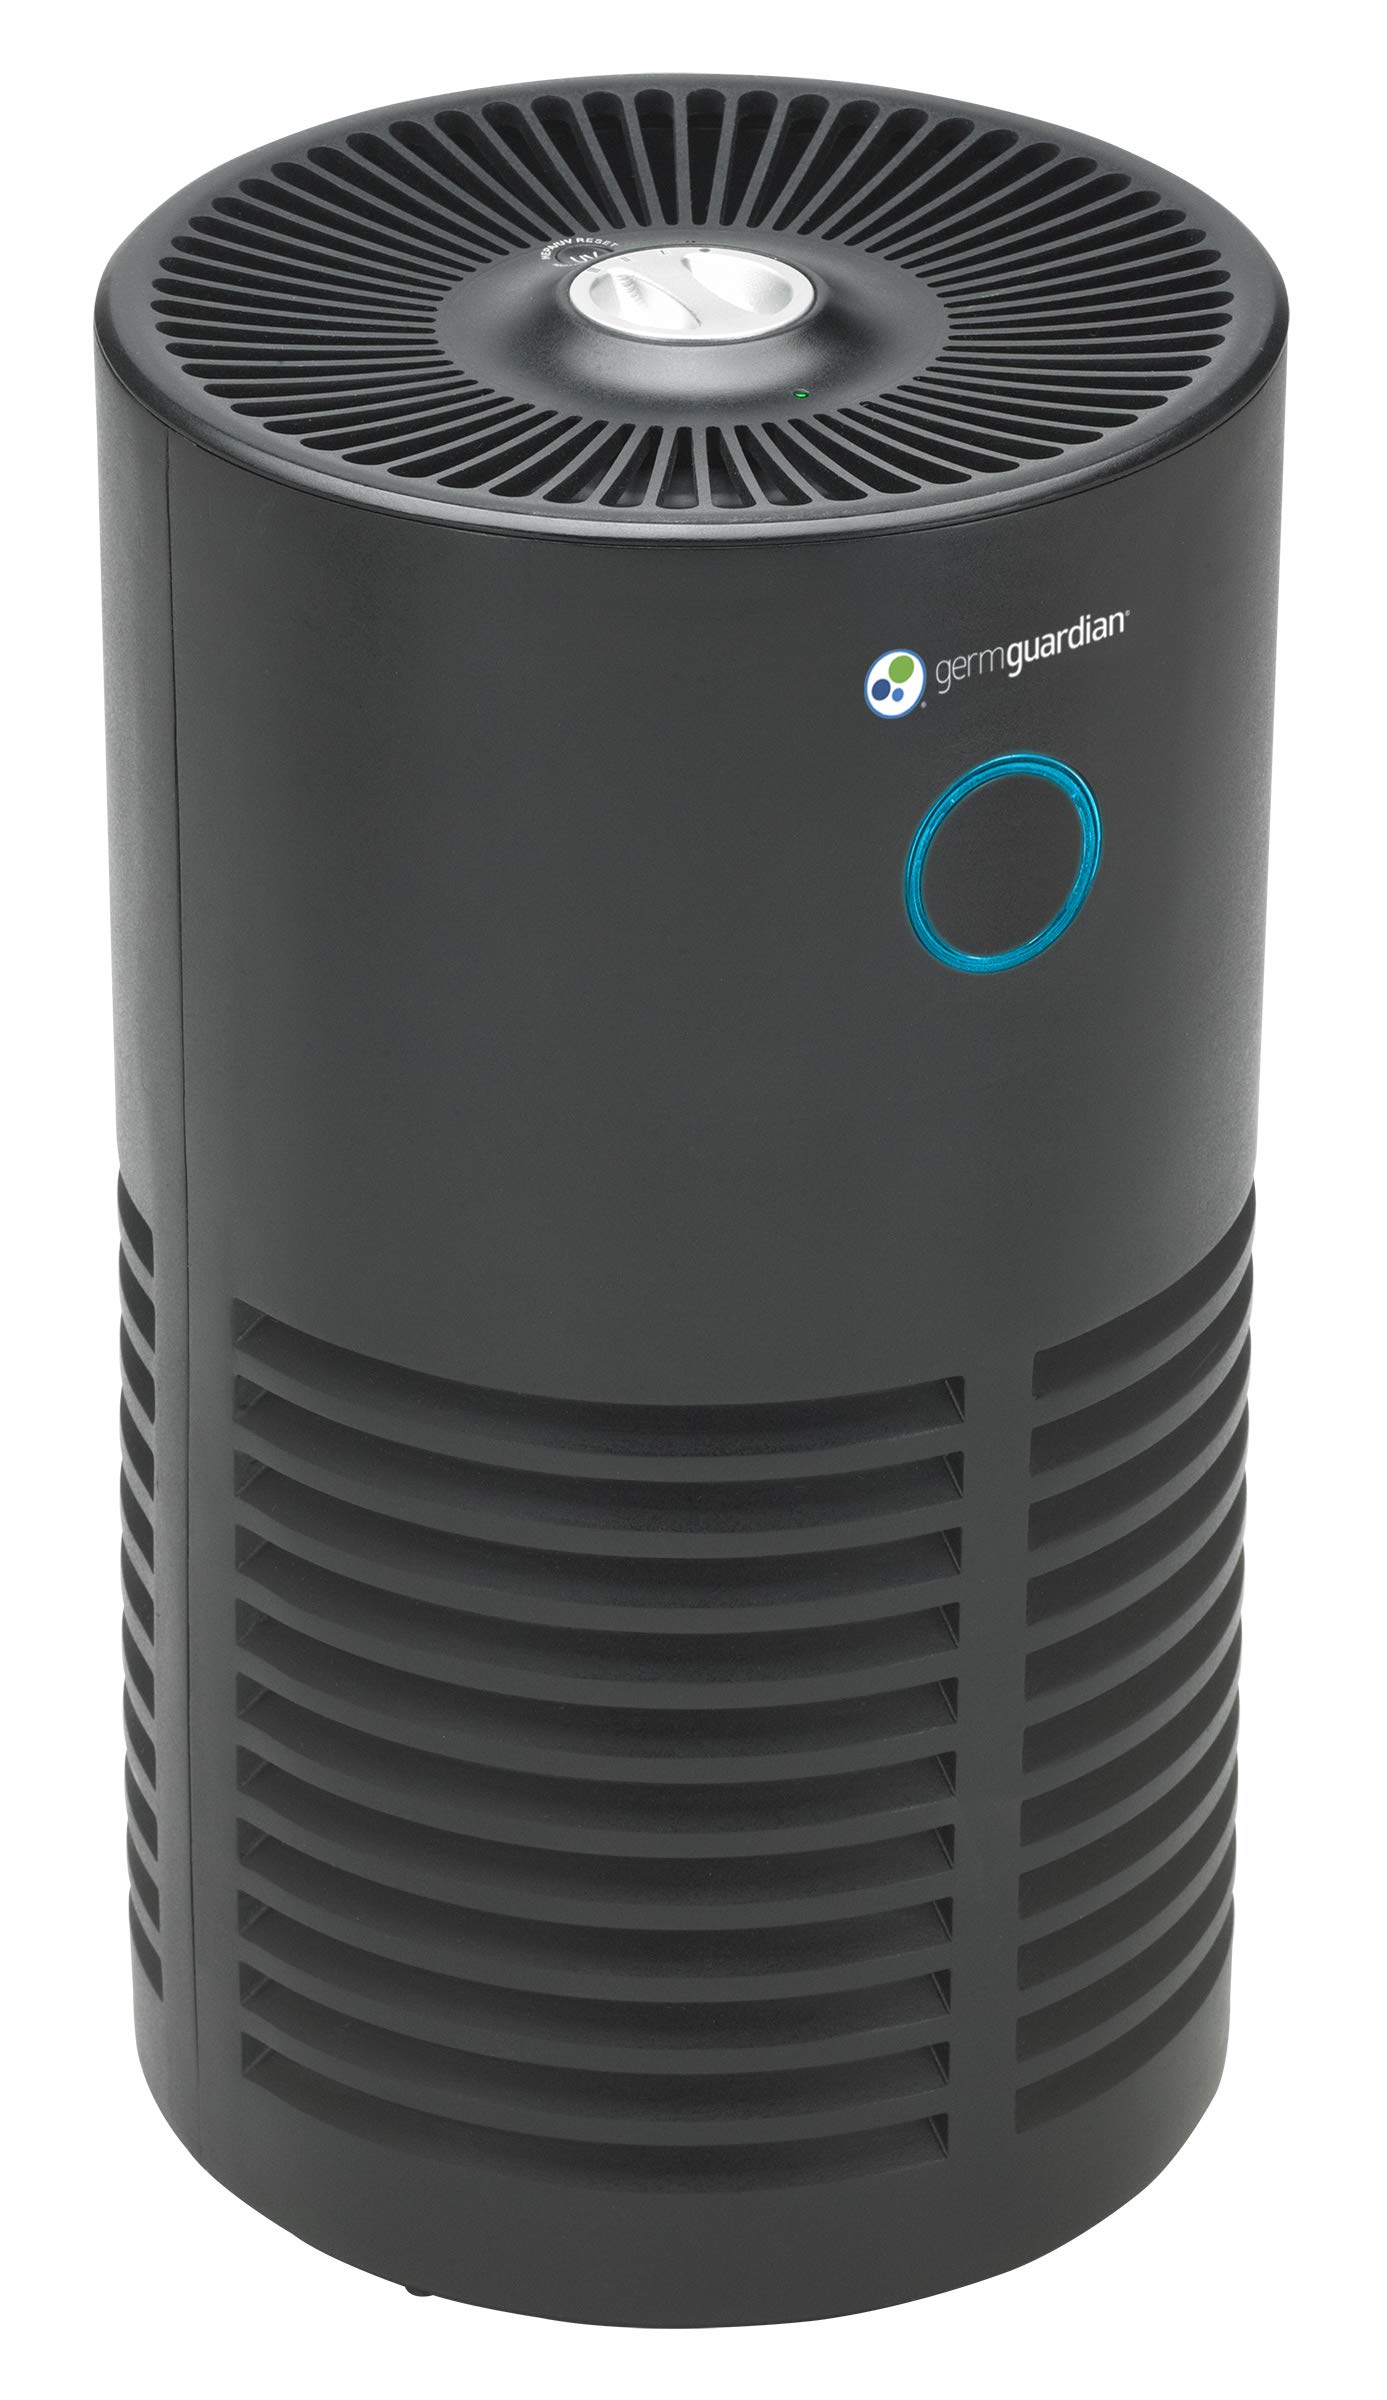 GermGuardian True HEPA Filter Air Purifier for Home, Office, Bedrooms, Filters Allergies, Pollen, Smoke, Dust, Pet Dander, UV-C Sanitizer Eliminates Germs, Mold, Odors, Quiet 4-in-1 AC4700BDLX